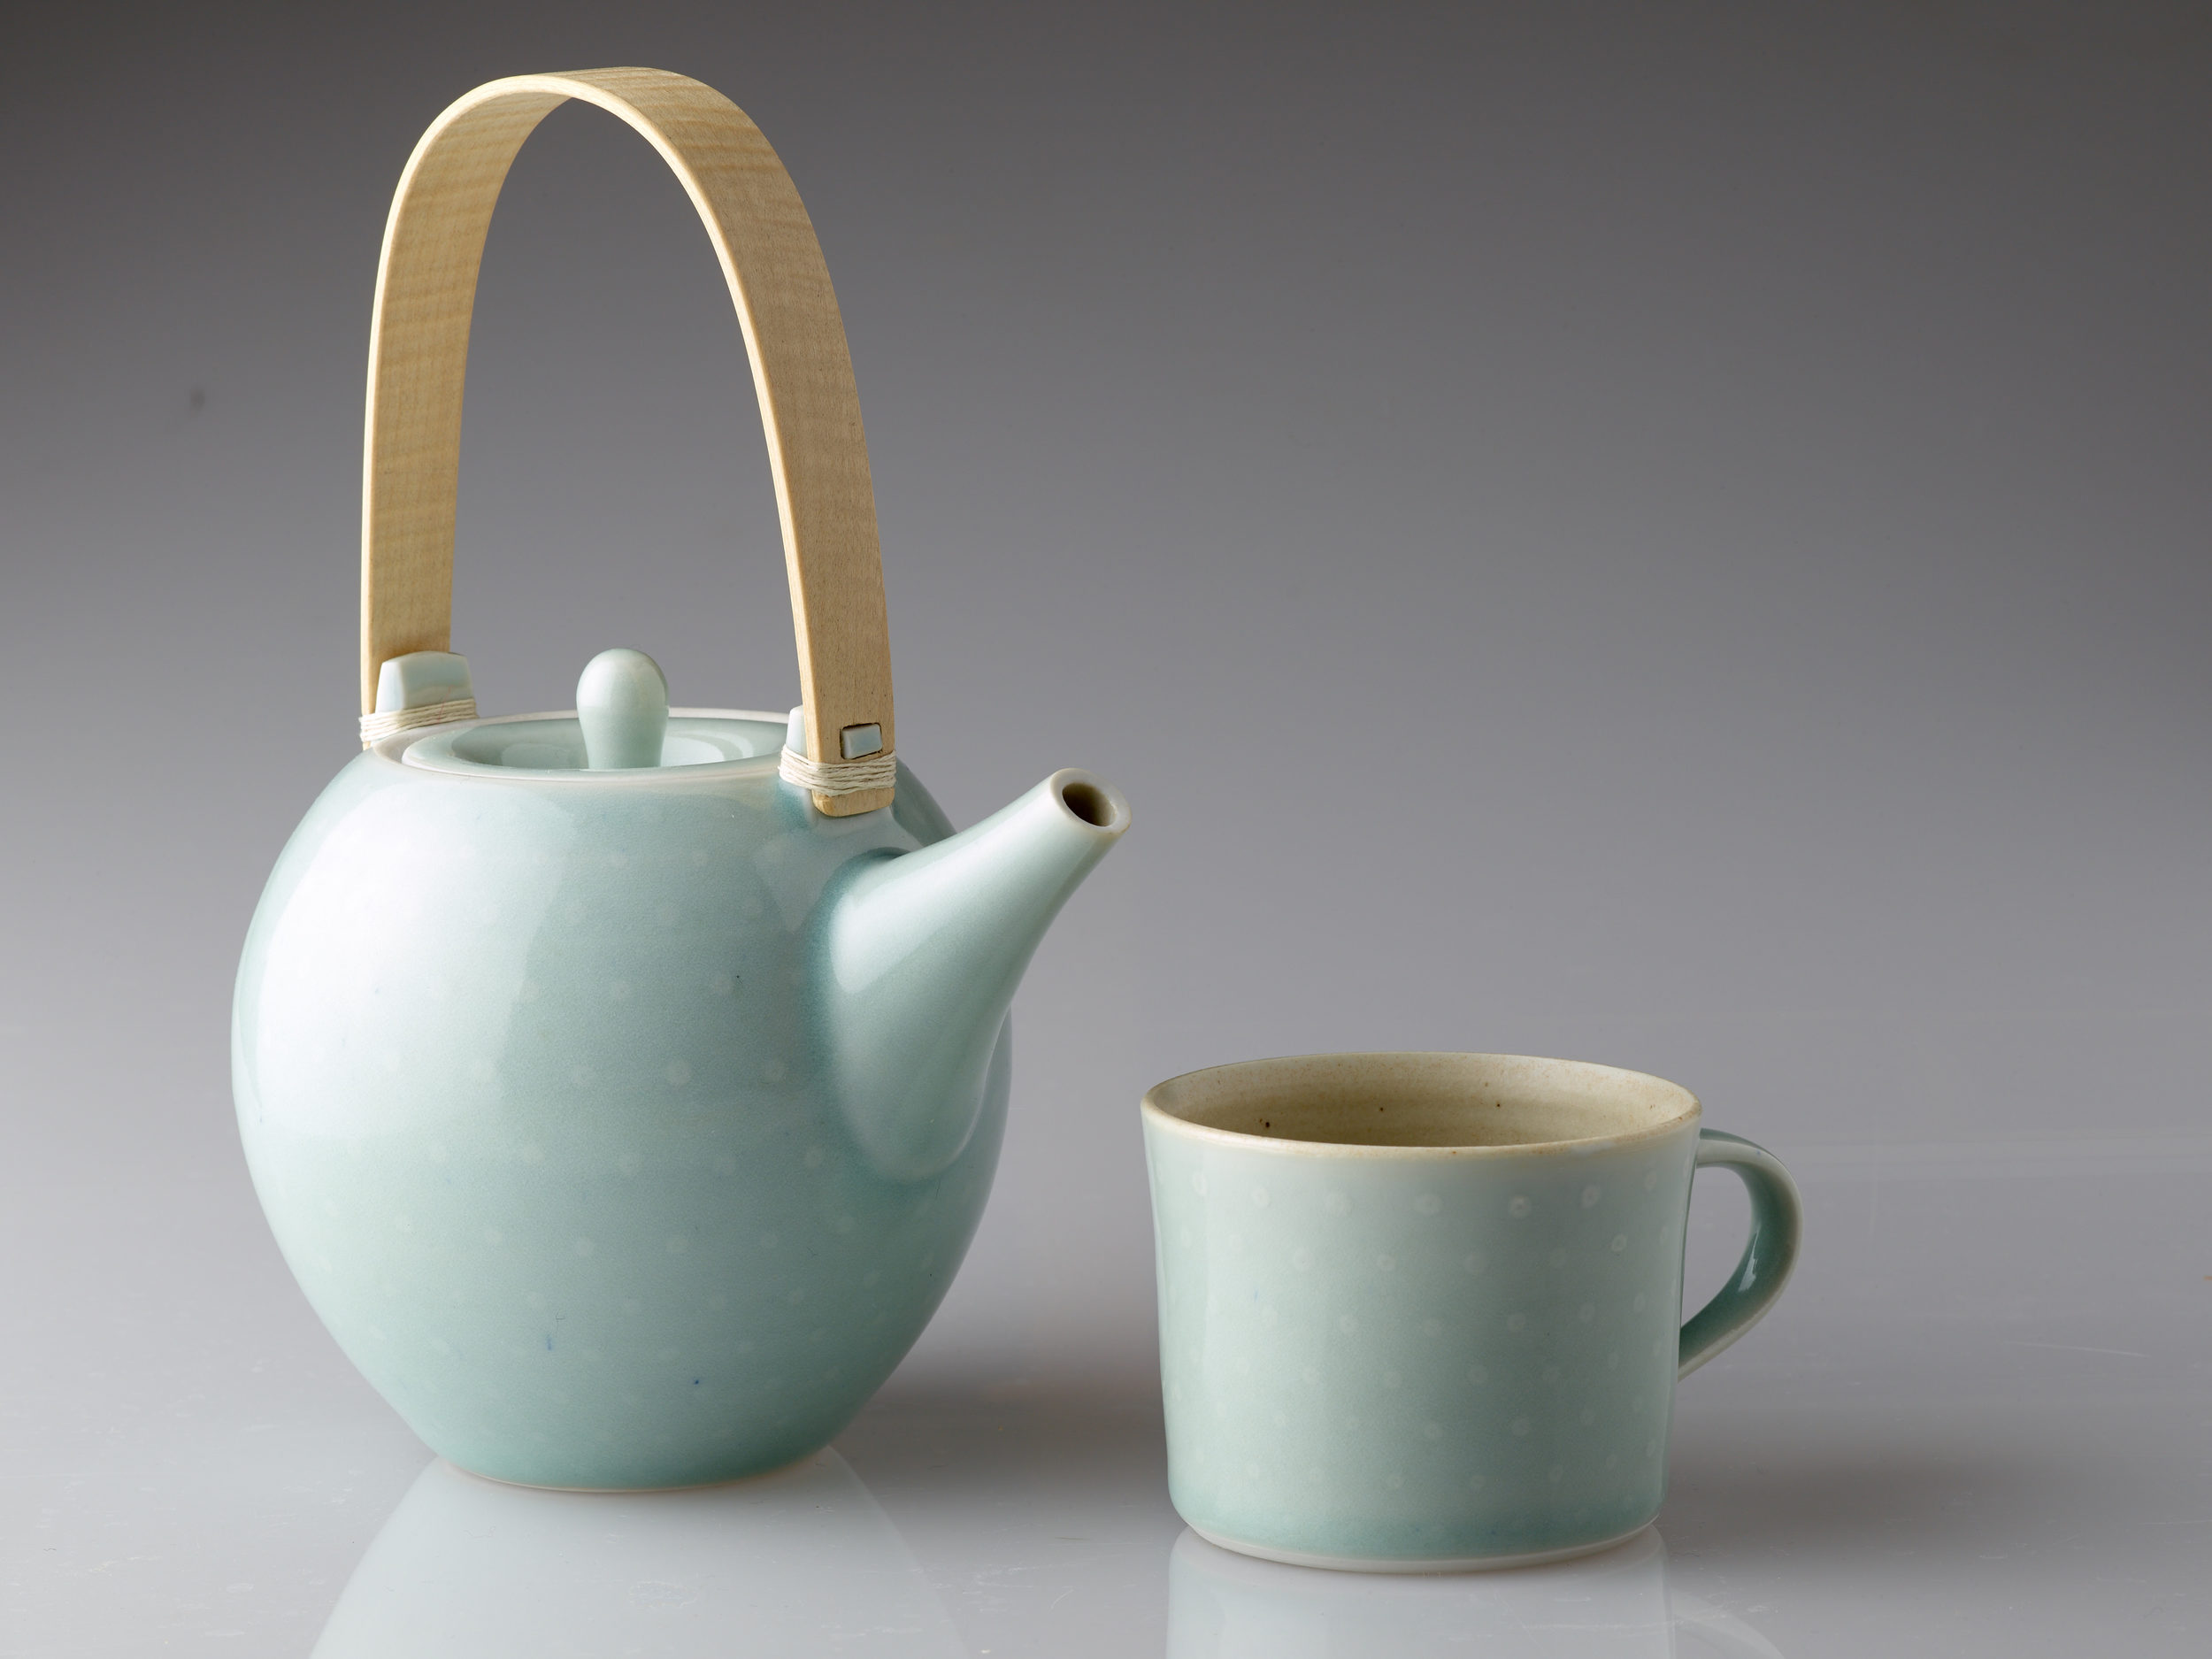 Celadon spot teapot with rippled maple handle